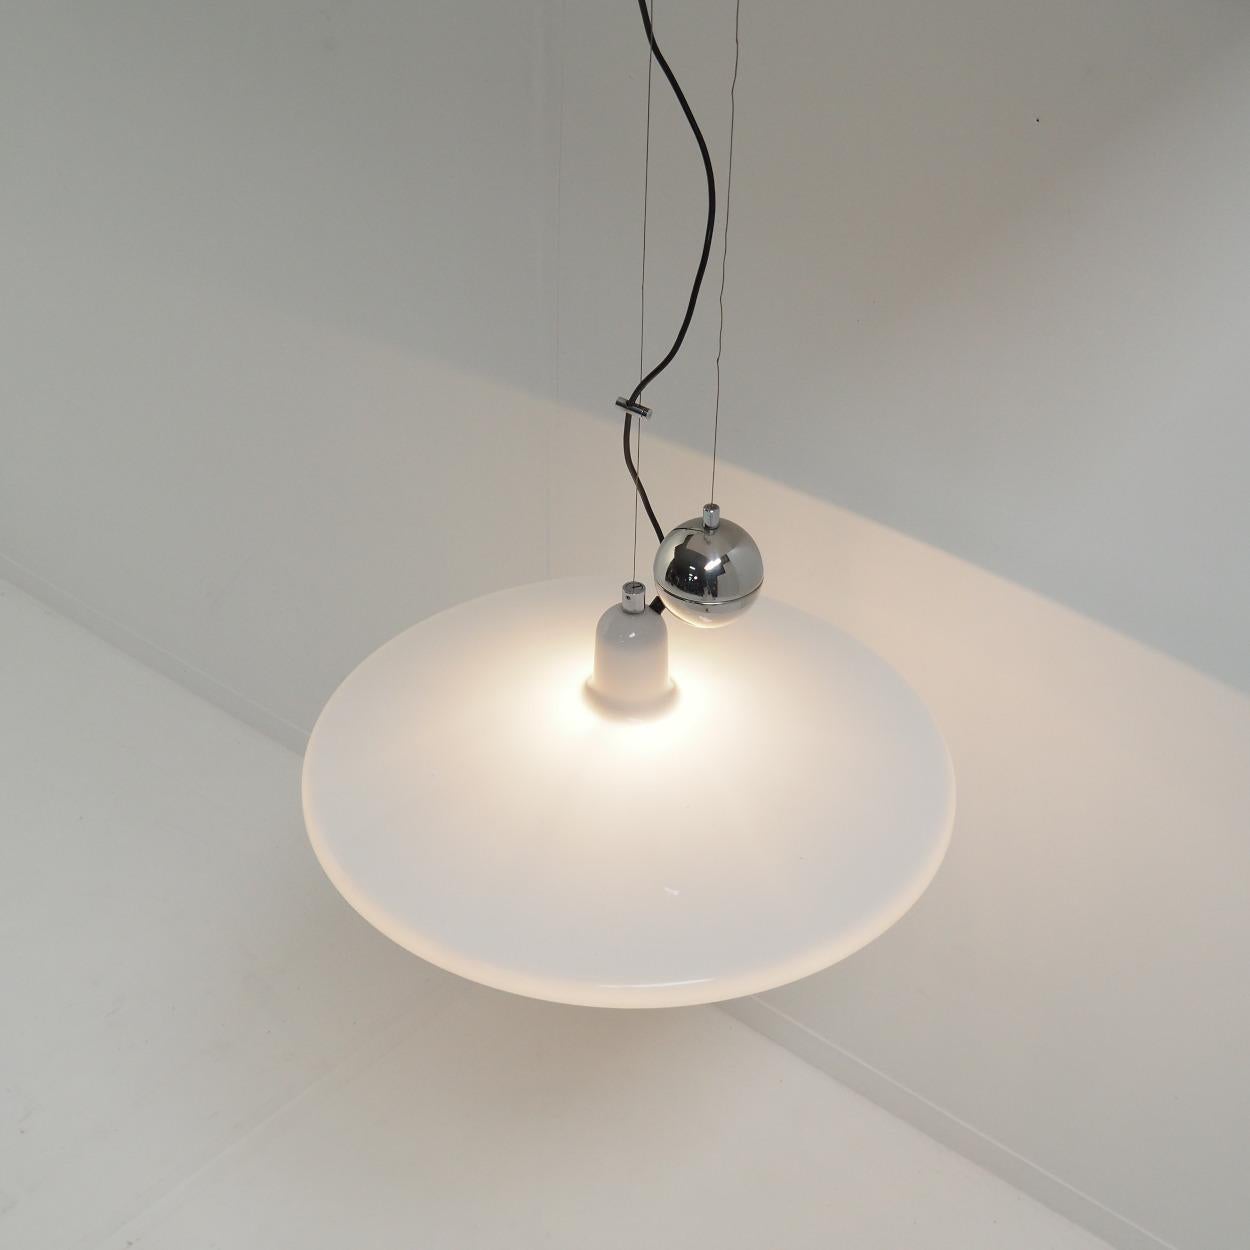 ‘Manta’ counterweight pendant designed in the 1970s by Franco Bresciani for the Italian manufacturer iGuzzini.

The lamp is made of acrylic and chrome-plated metal, and has a creamy white colour. It’s adjustable in height and when lit the shade is